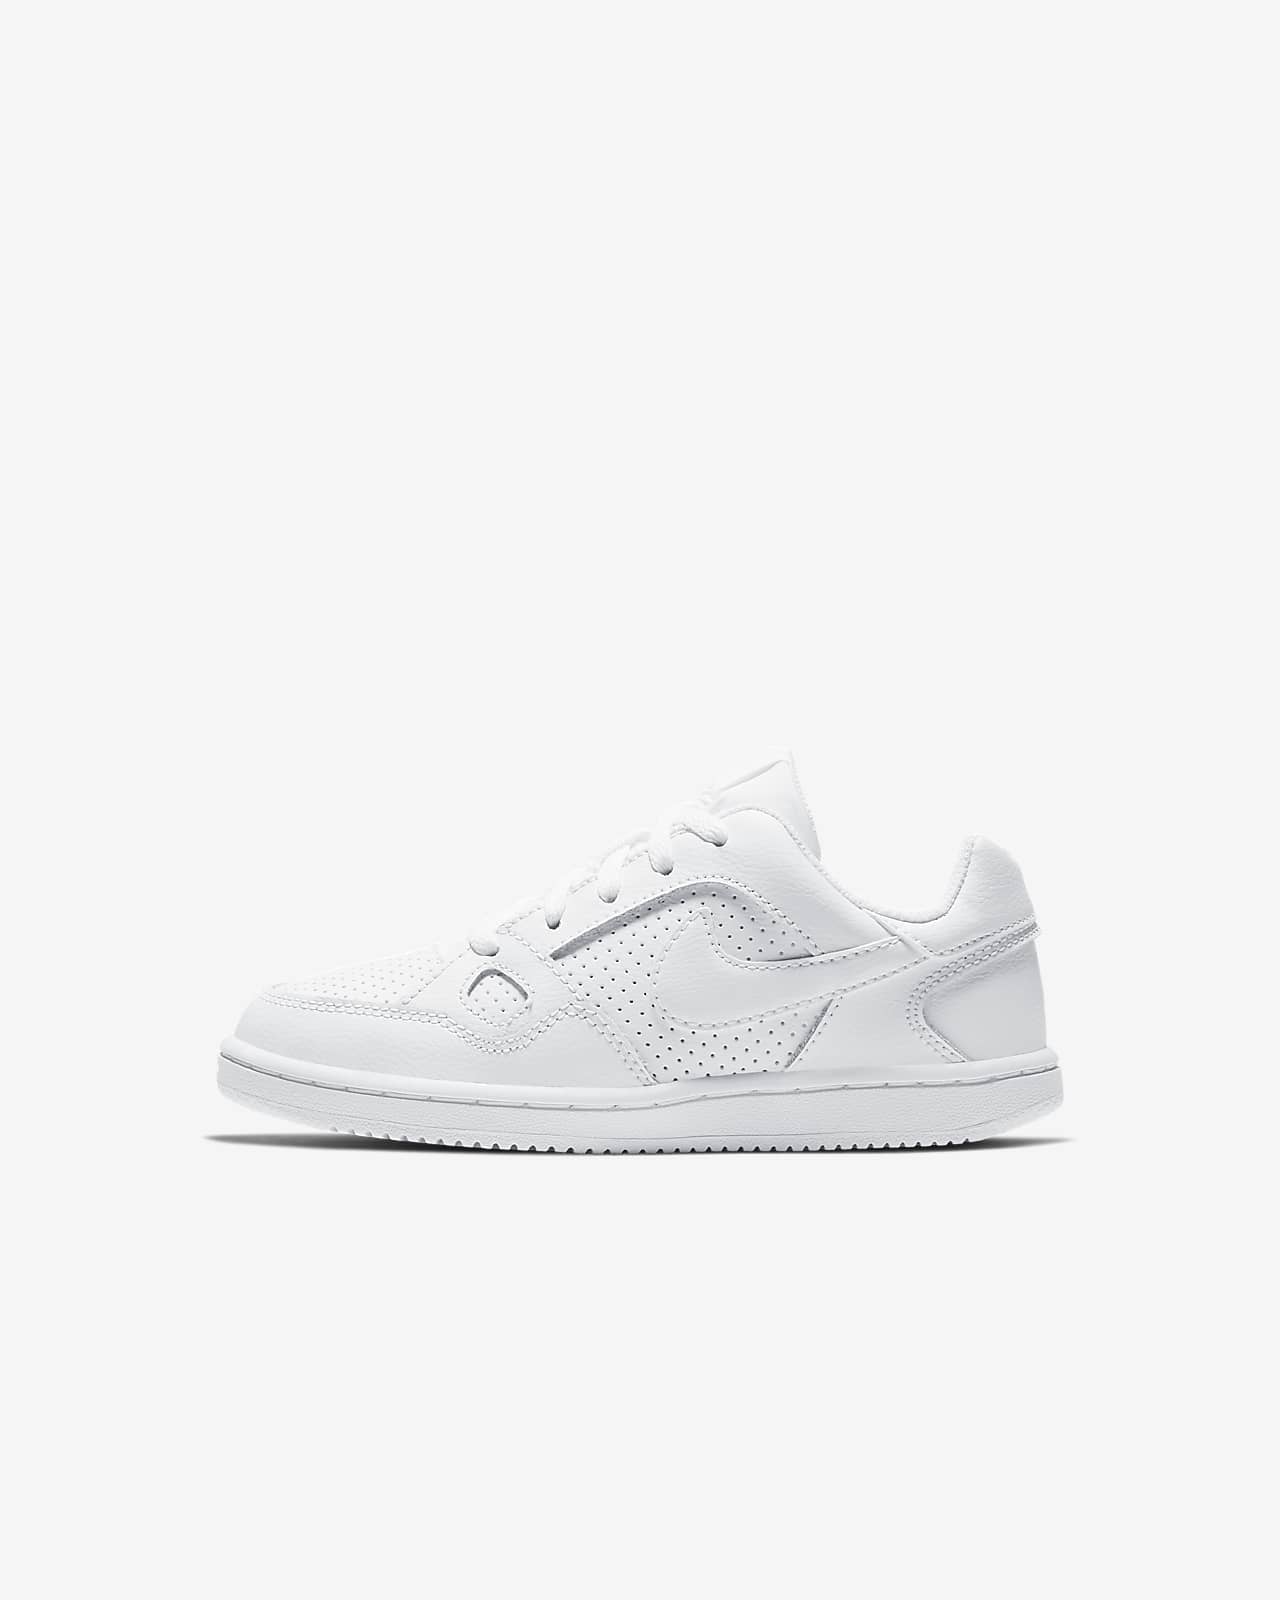 nike son of force white